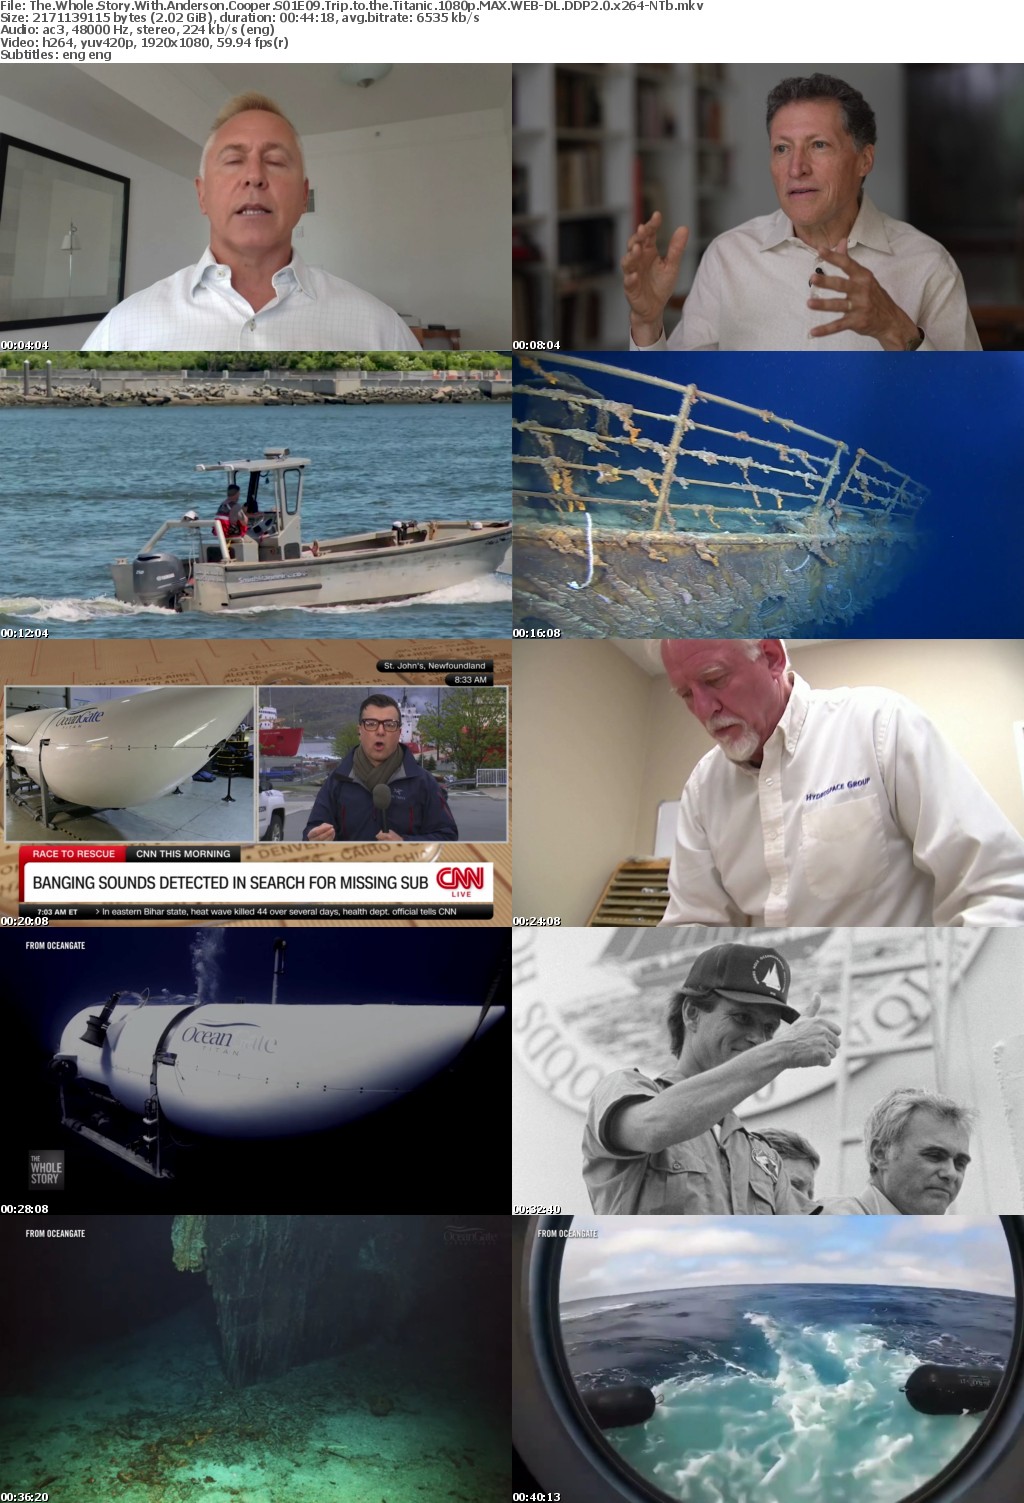 The Whole Story With Anderson Cooper S01E09 Trip to the Titanic 1080p MAX WEB-DL DDP2 0 x264-NTb